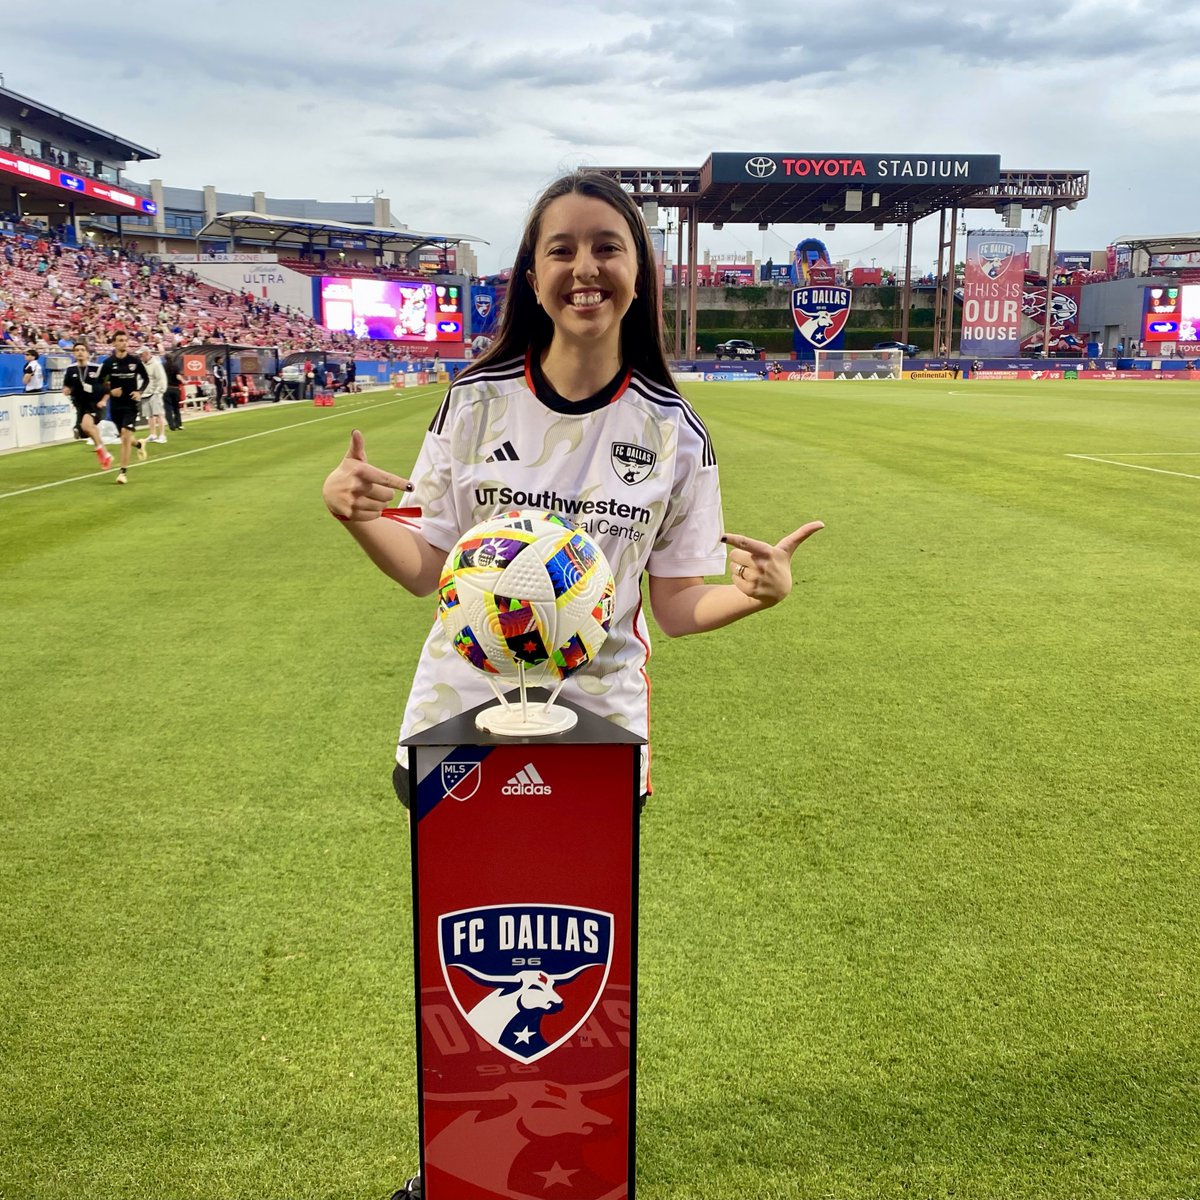 We welcome our Honorary Captain of the Match pres. by @UTSWNews, Kirby Baber! Kirby is studying to become a Dietitian at the UT Southwestern School of Health Professions. She hopes to someday work as a critical care dietitian, helping patients get the nutrition they need to heal!